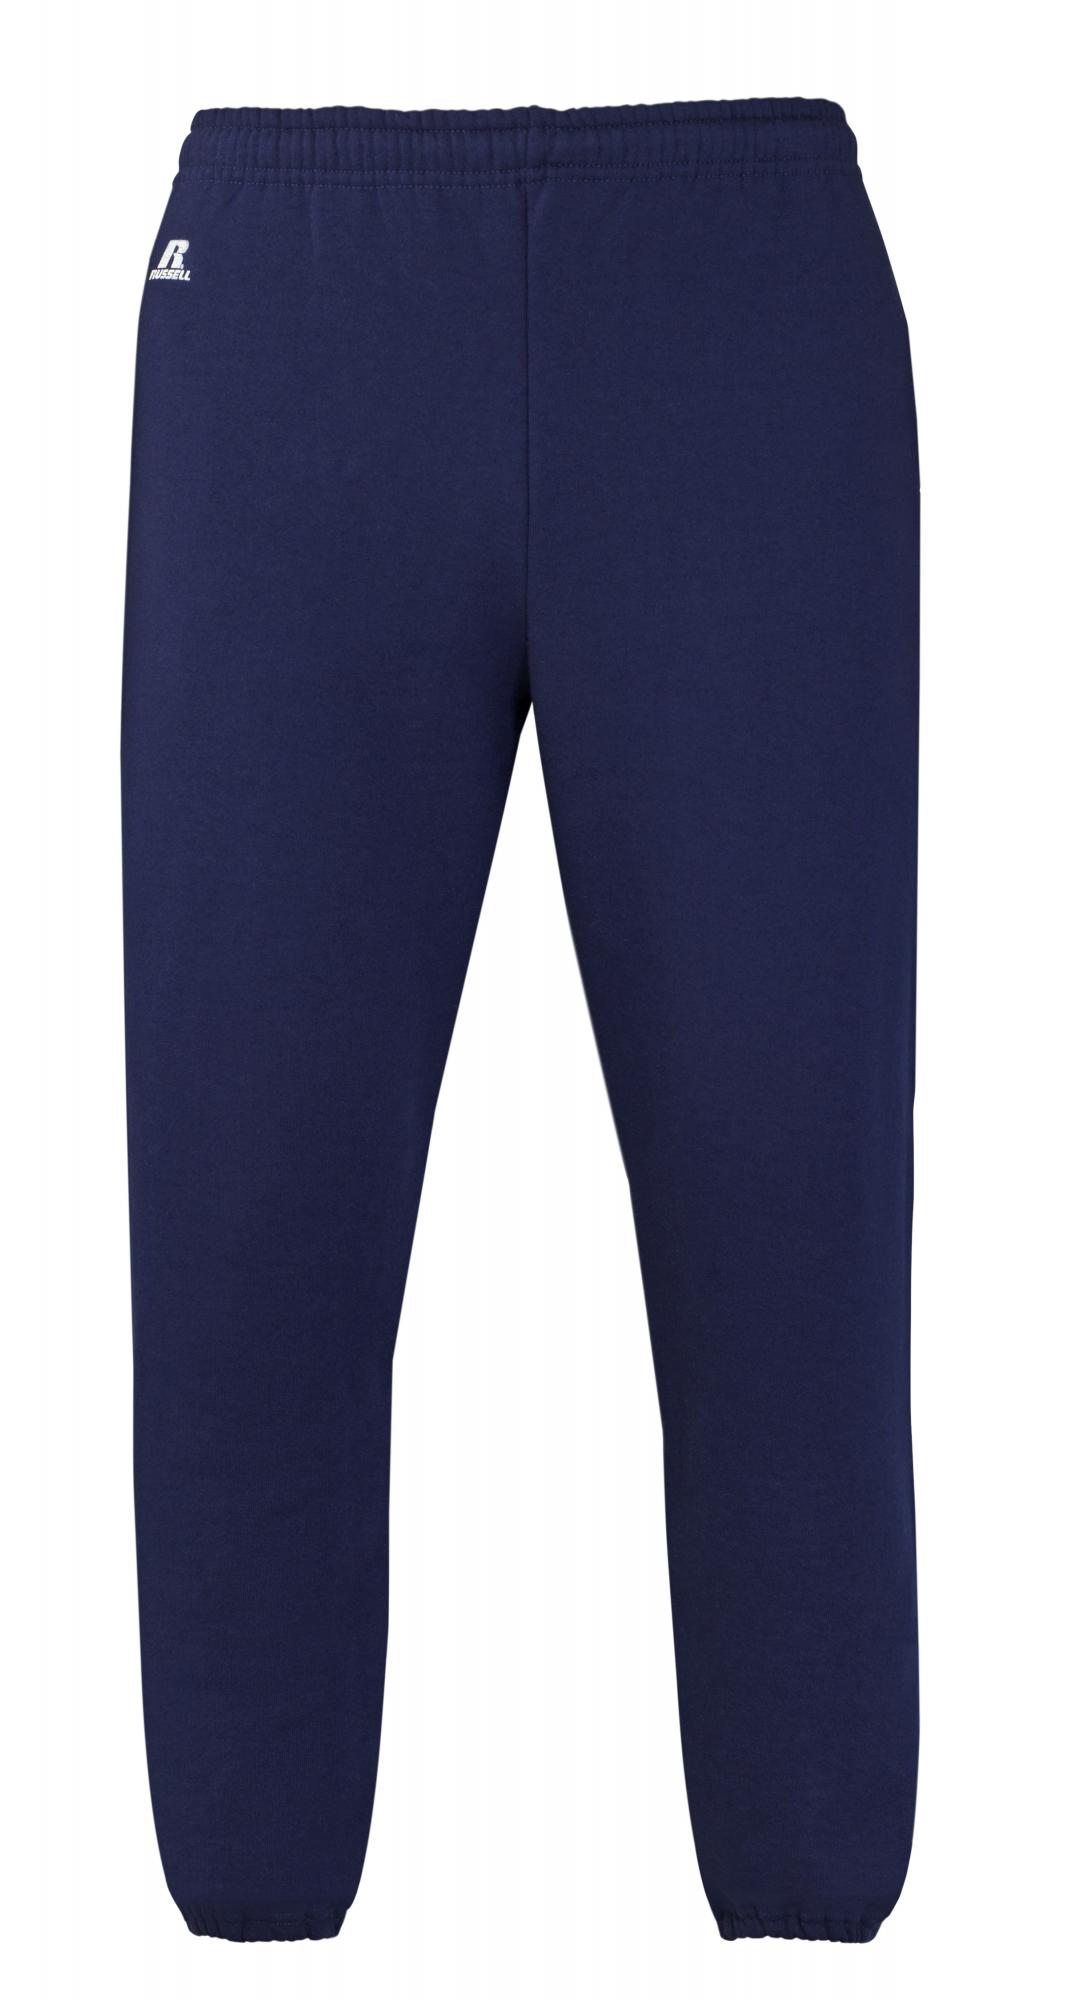 Russell Athletic DRI-POWER Pocketed Closed-Bottom Sweatpant